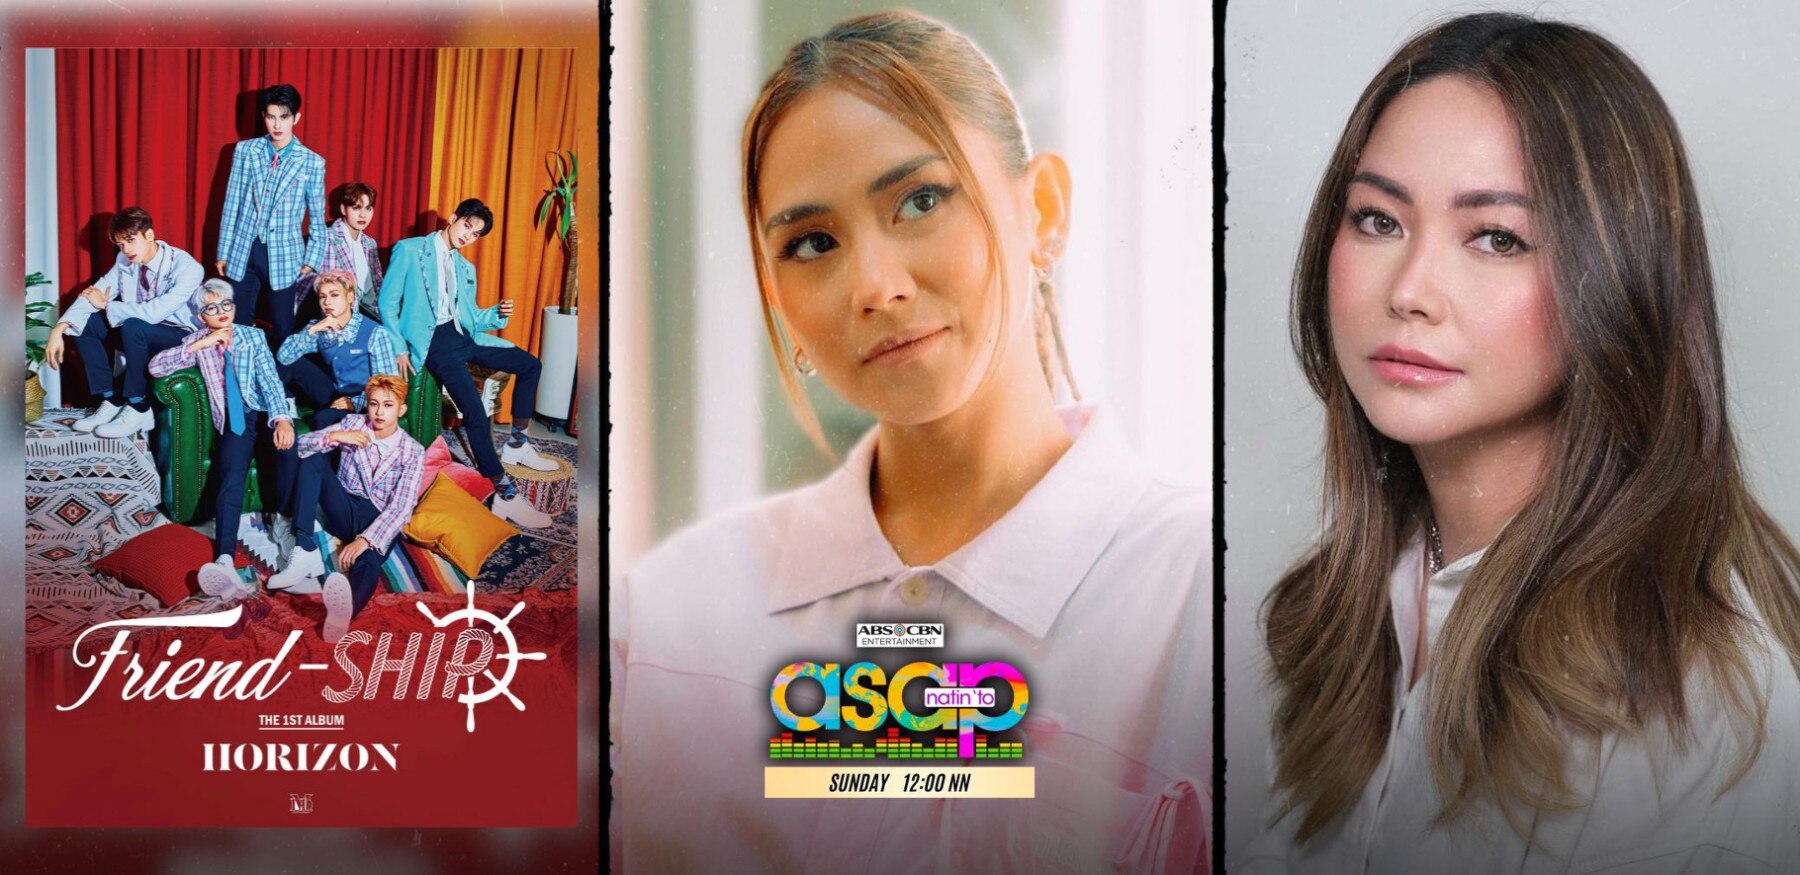 Catch Sarah G, HORI7ON, and Yeng perform live on 'ASAP Natin 'To'